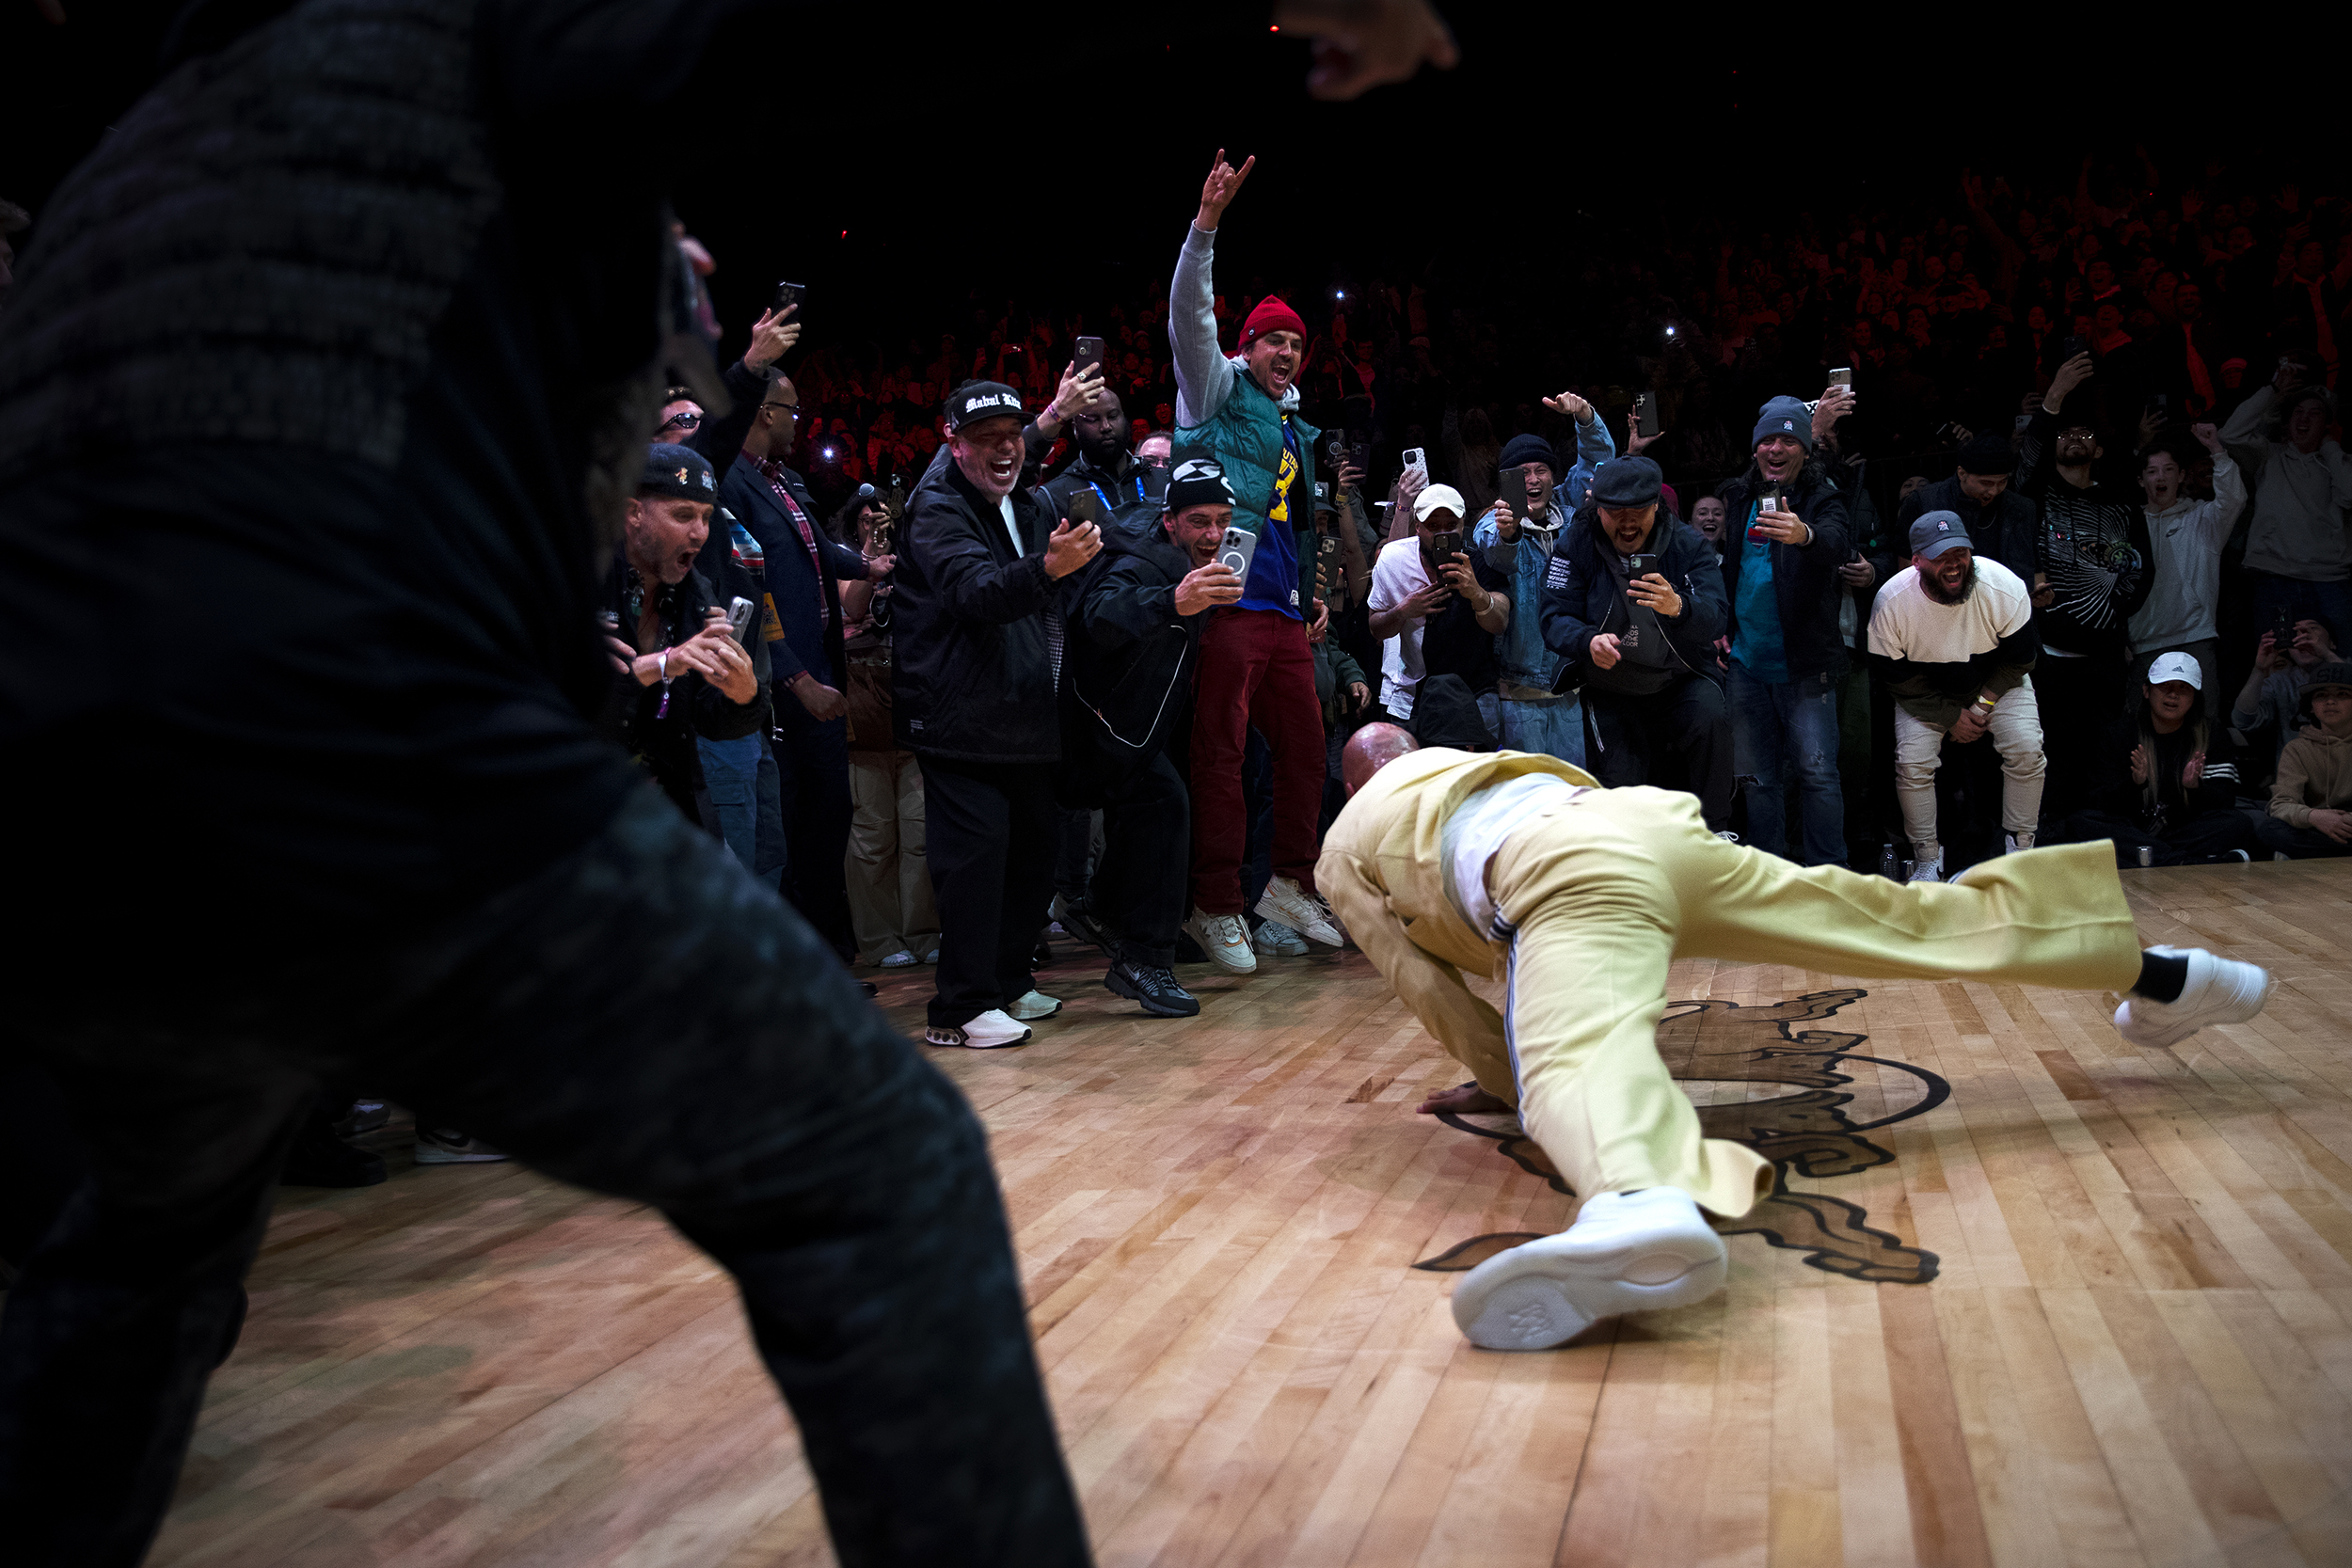 KUOW - On the count of 3...Go! Rapper Common surprises fans with dance solo  at Seattle breaking competition